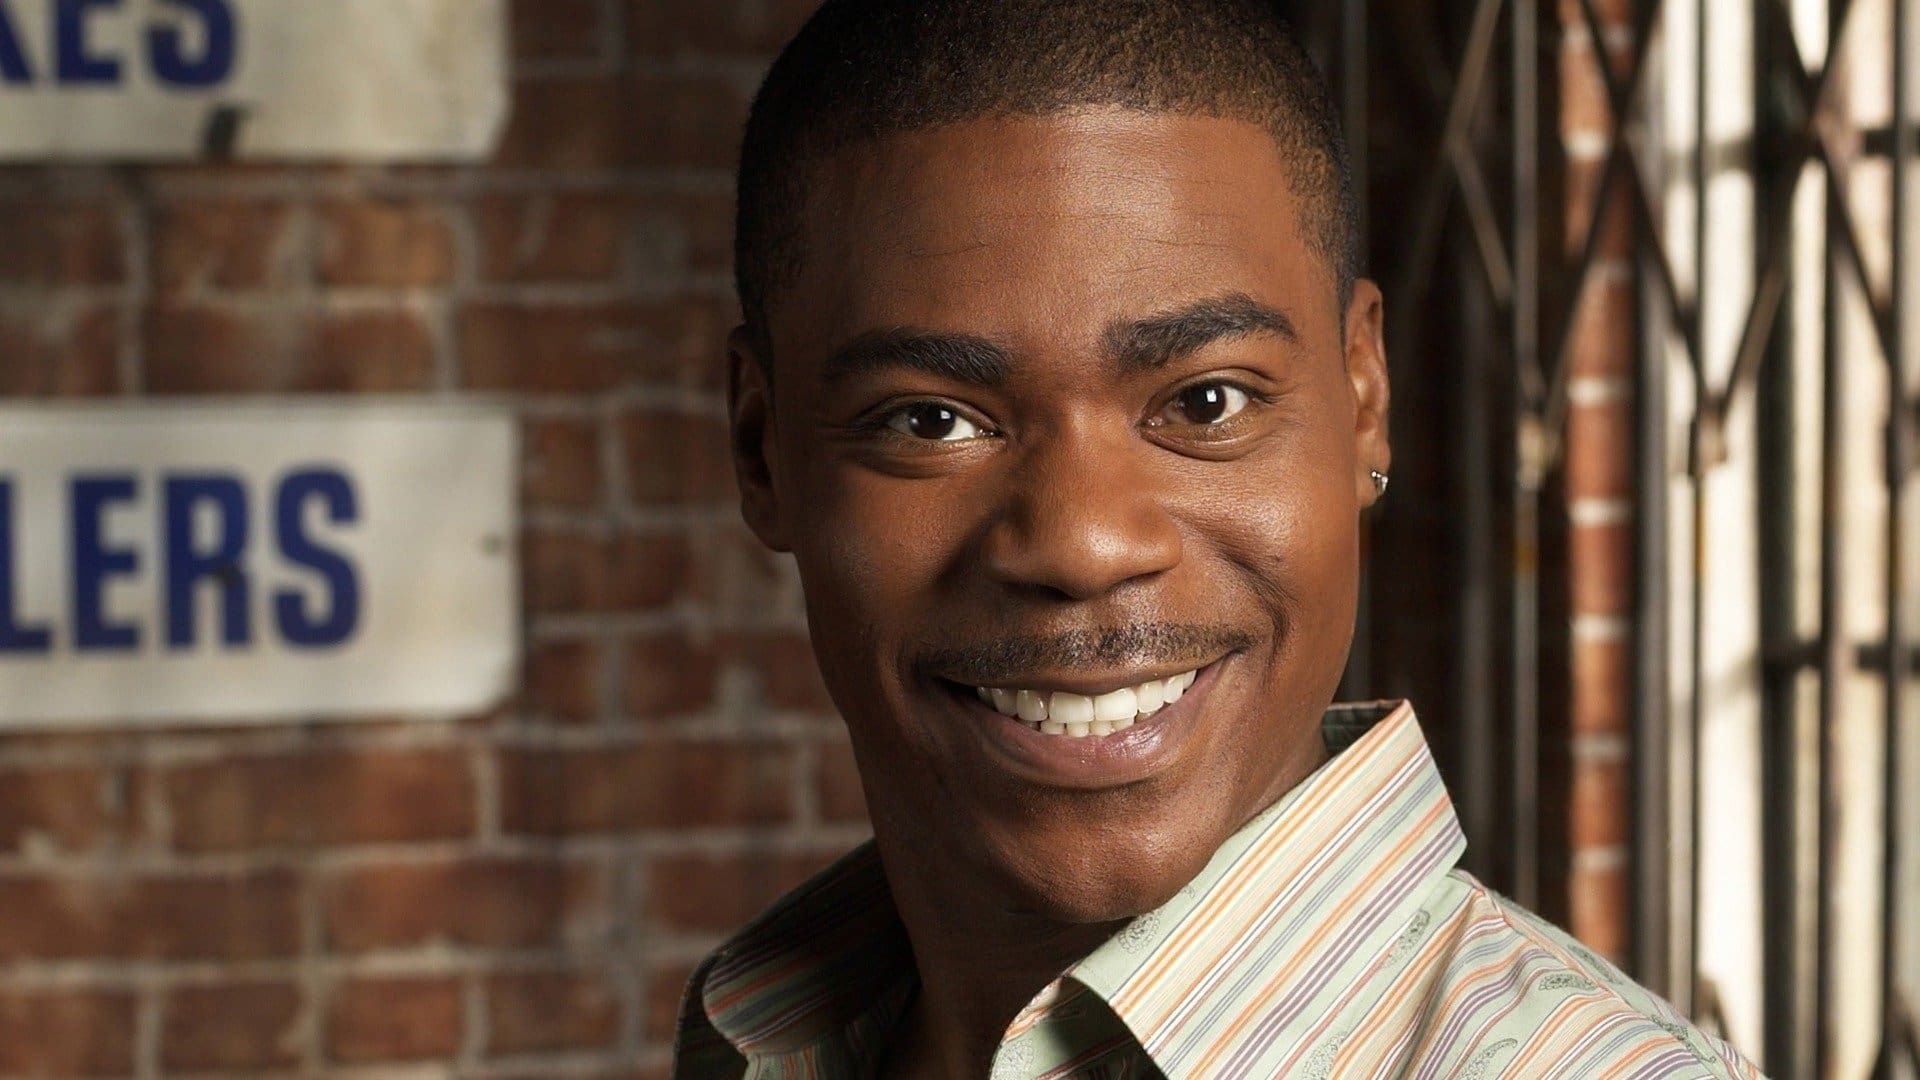 The Tracy Morgan Show background